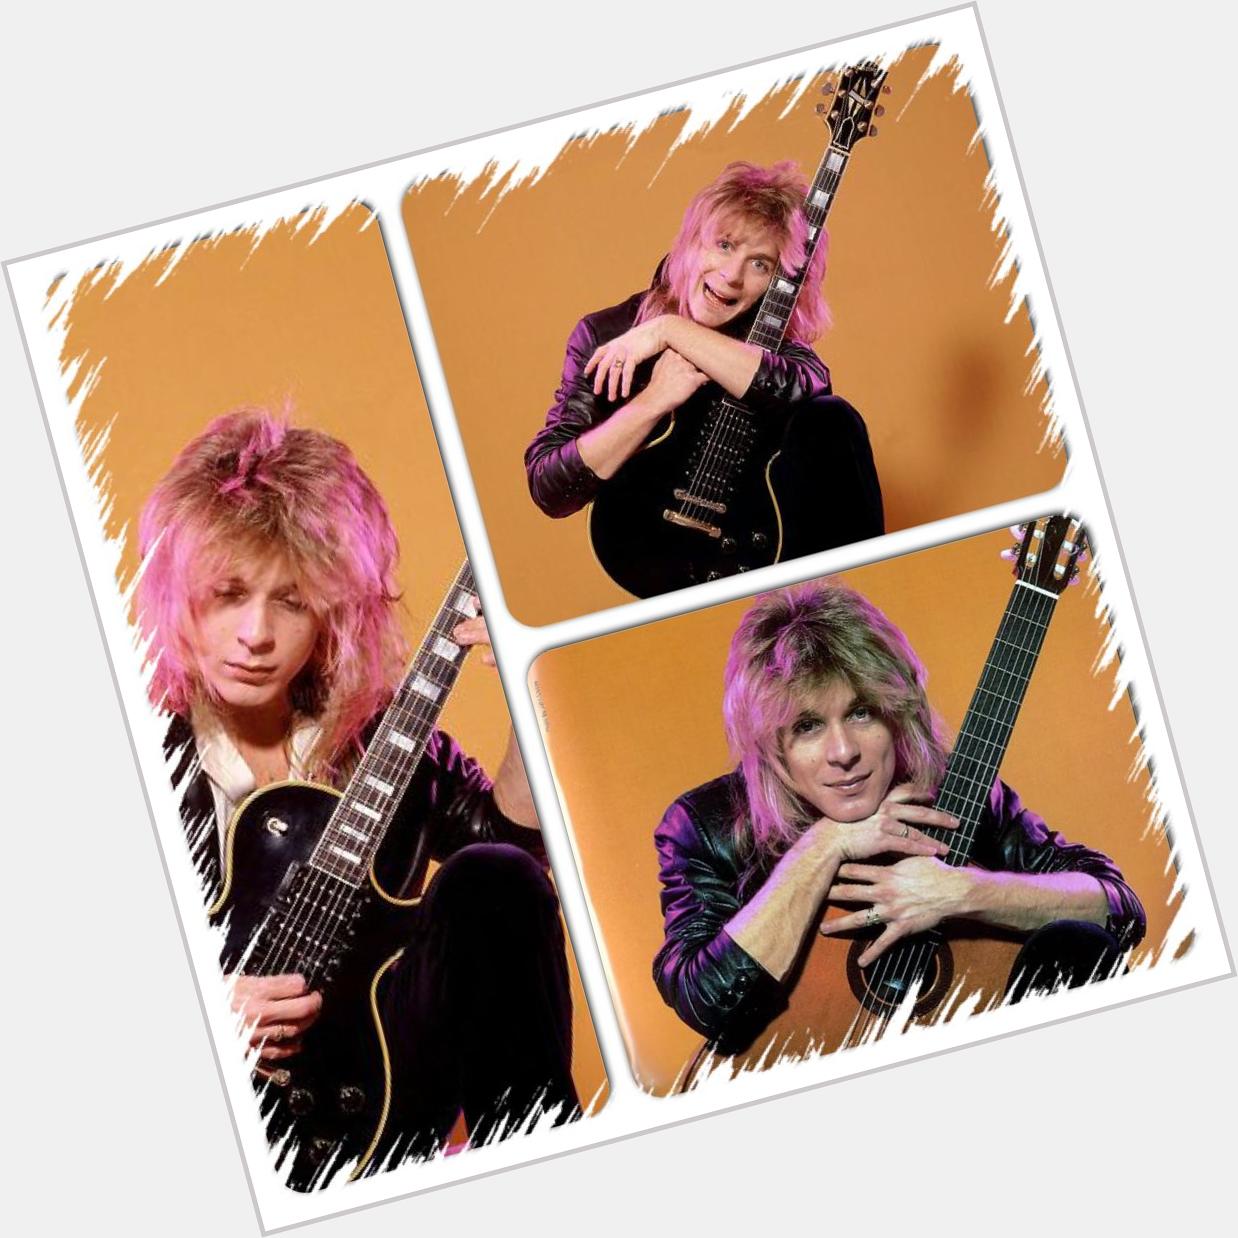 Happy birthday to my all time favorite guitar player Randy Rhoads. I cant wait to hear you play in heaven someday!! 